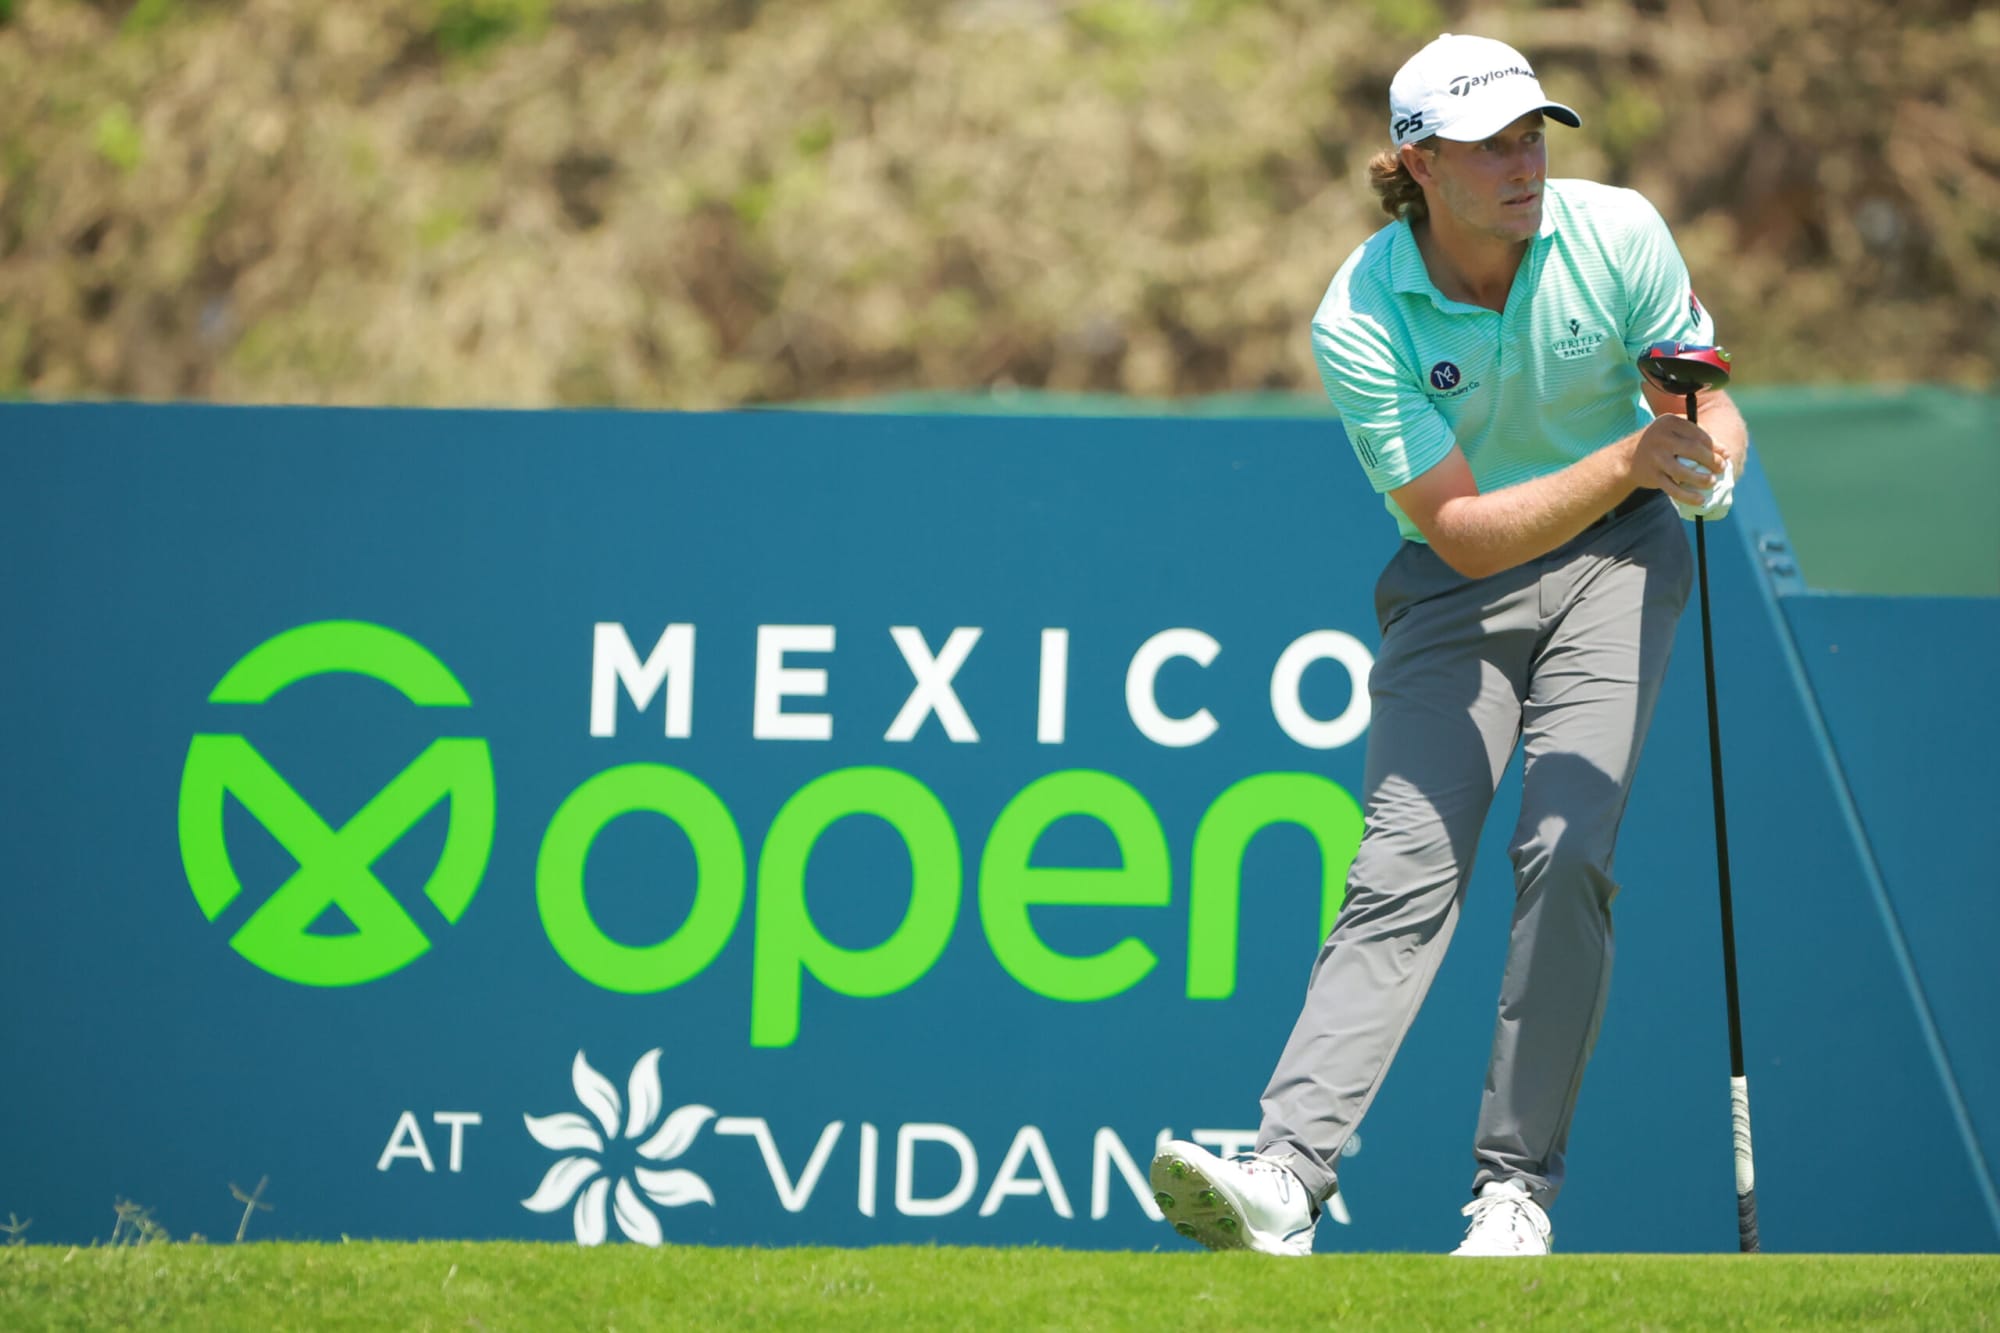 2023 Mexico Open at Vidanta Prize Money and Payouts by Position